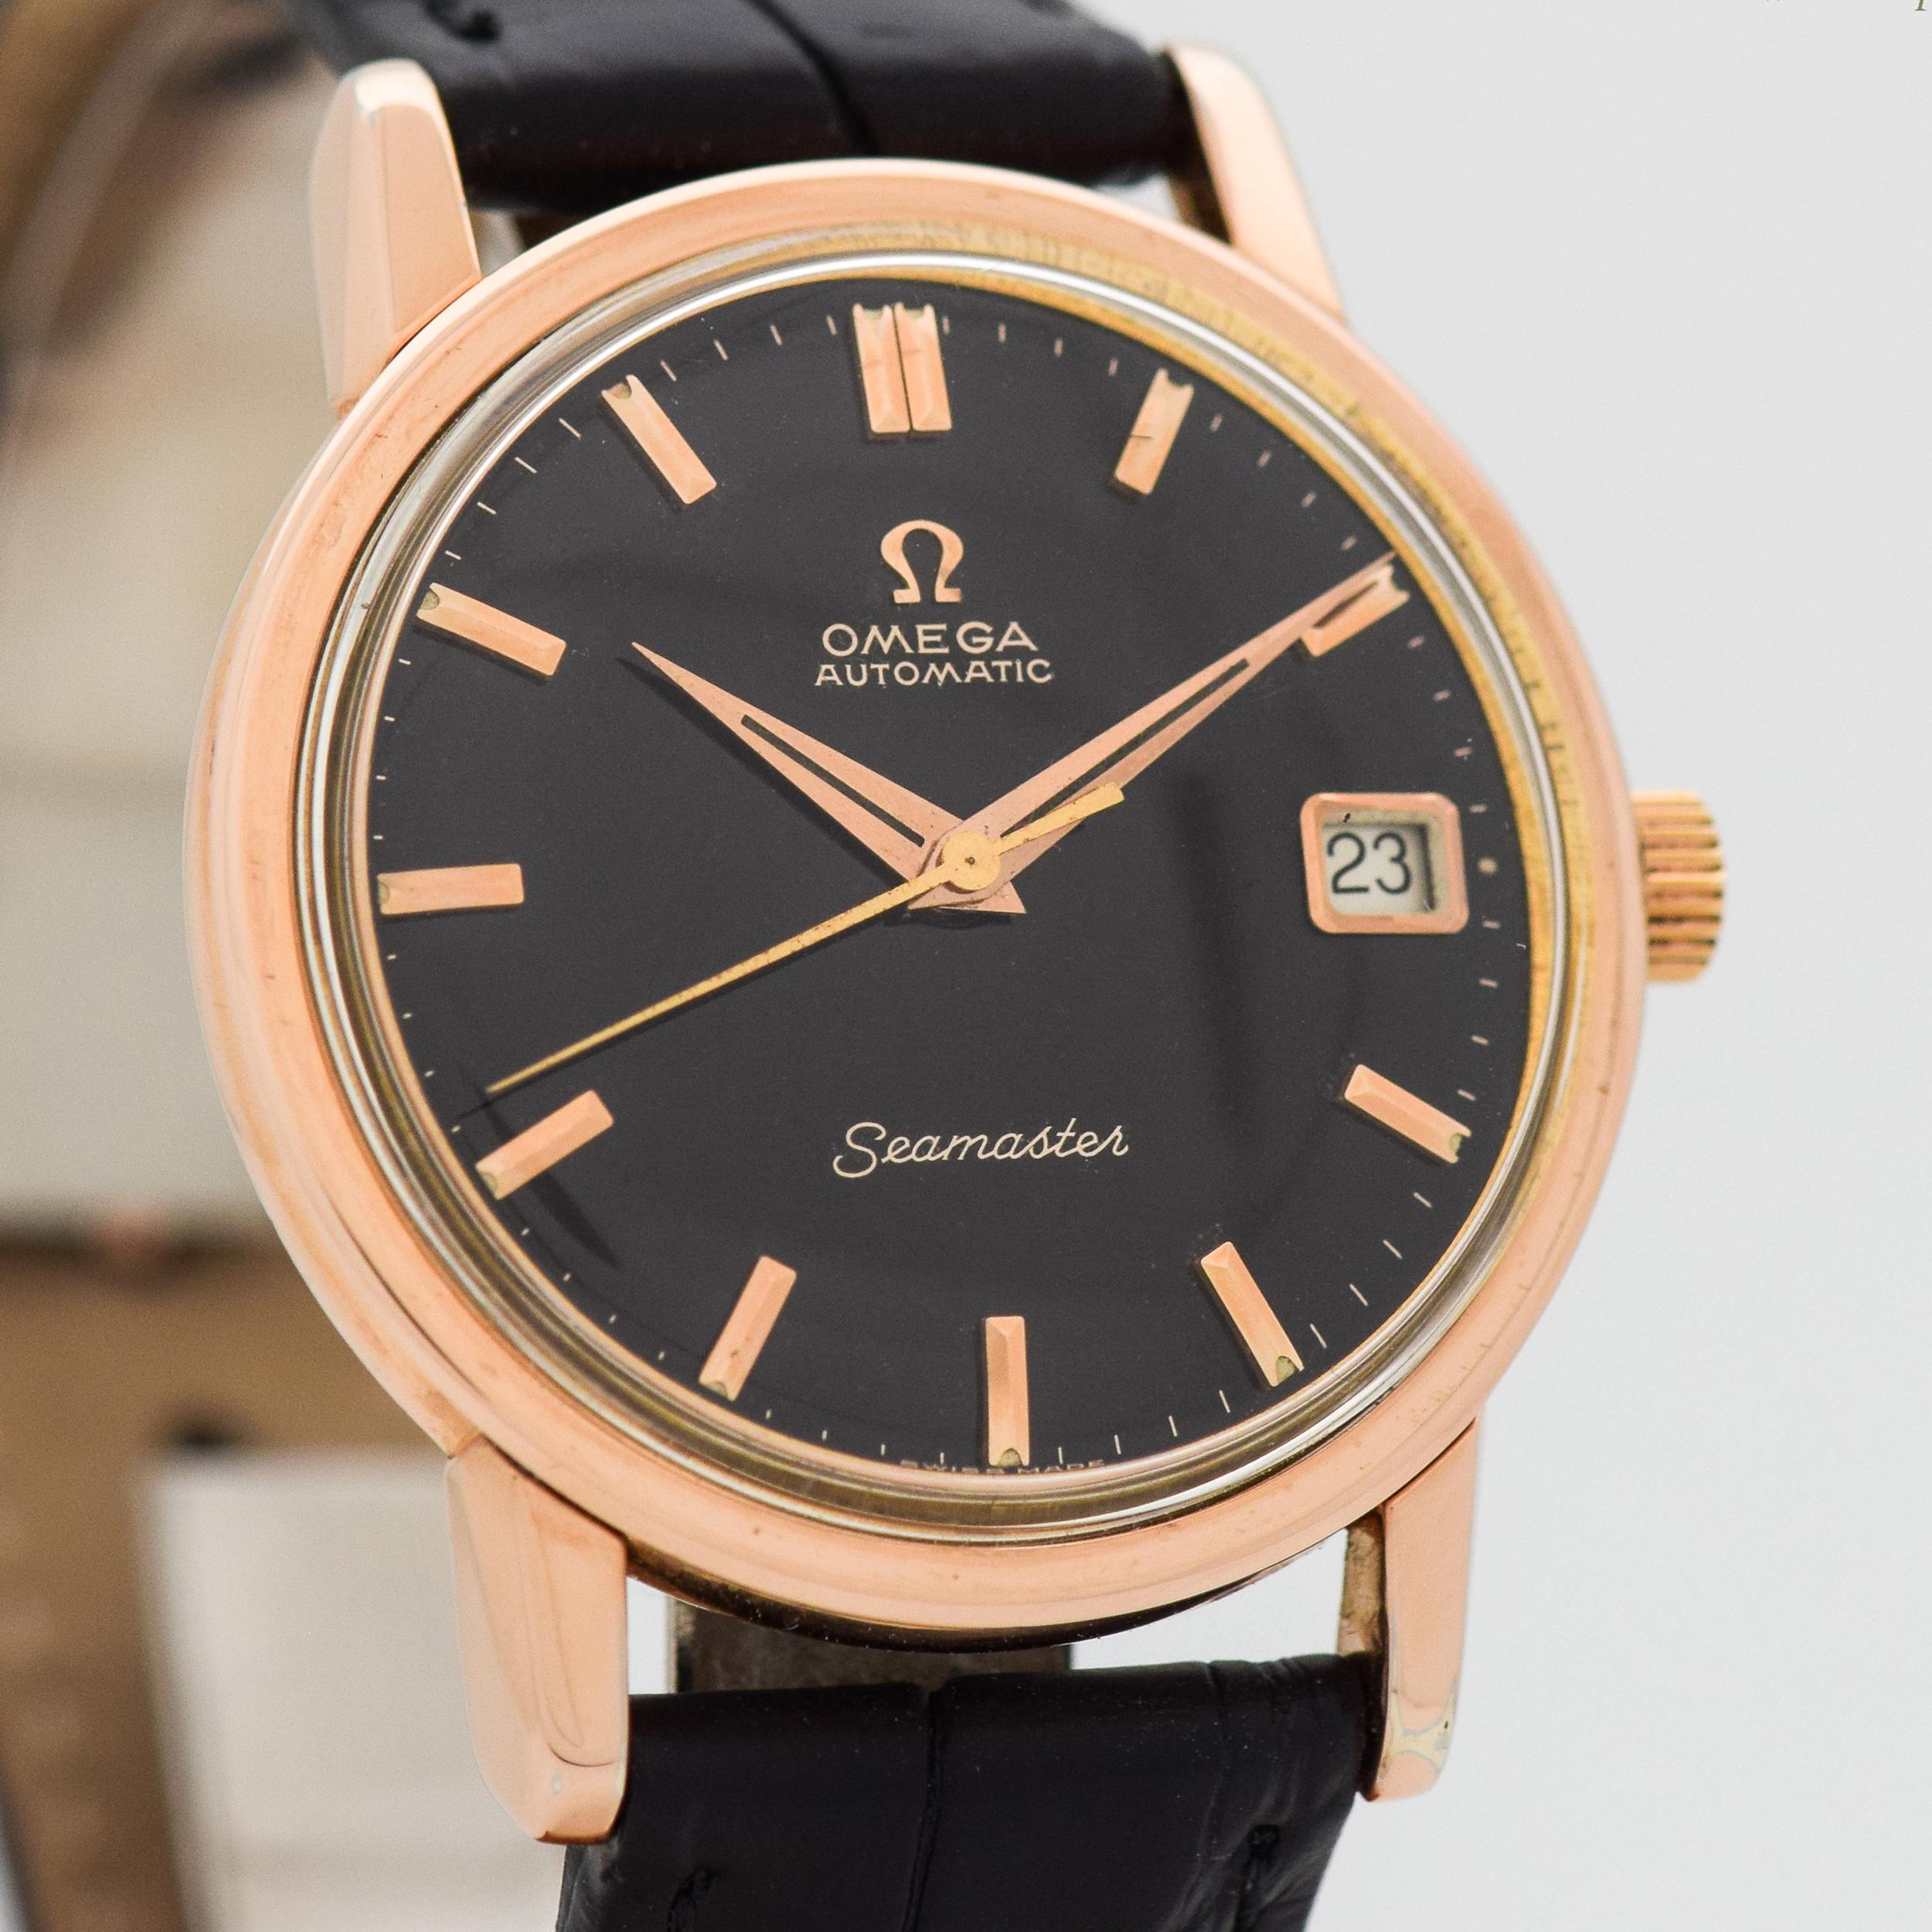 1963 Vintage Omega Seamaster Ref. 166.003 14k Rose Gold Bezel and Caped Lugs with Stainless Steel Case Back with Original Black Dial with Rose Gold Beveled Stick/Bar/Baton Markers with Original Omega Box. 34mm x 41mm lug to lug (1.34 in. x 1.61 in.)